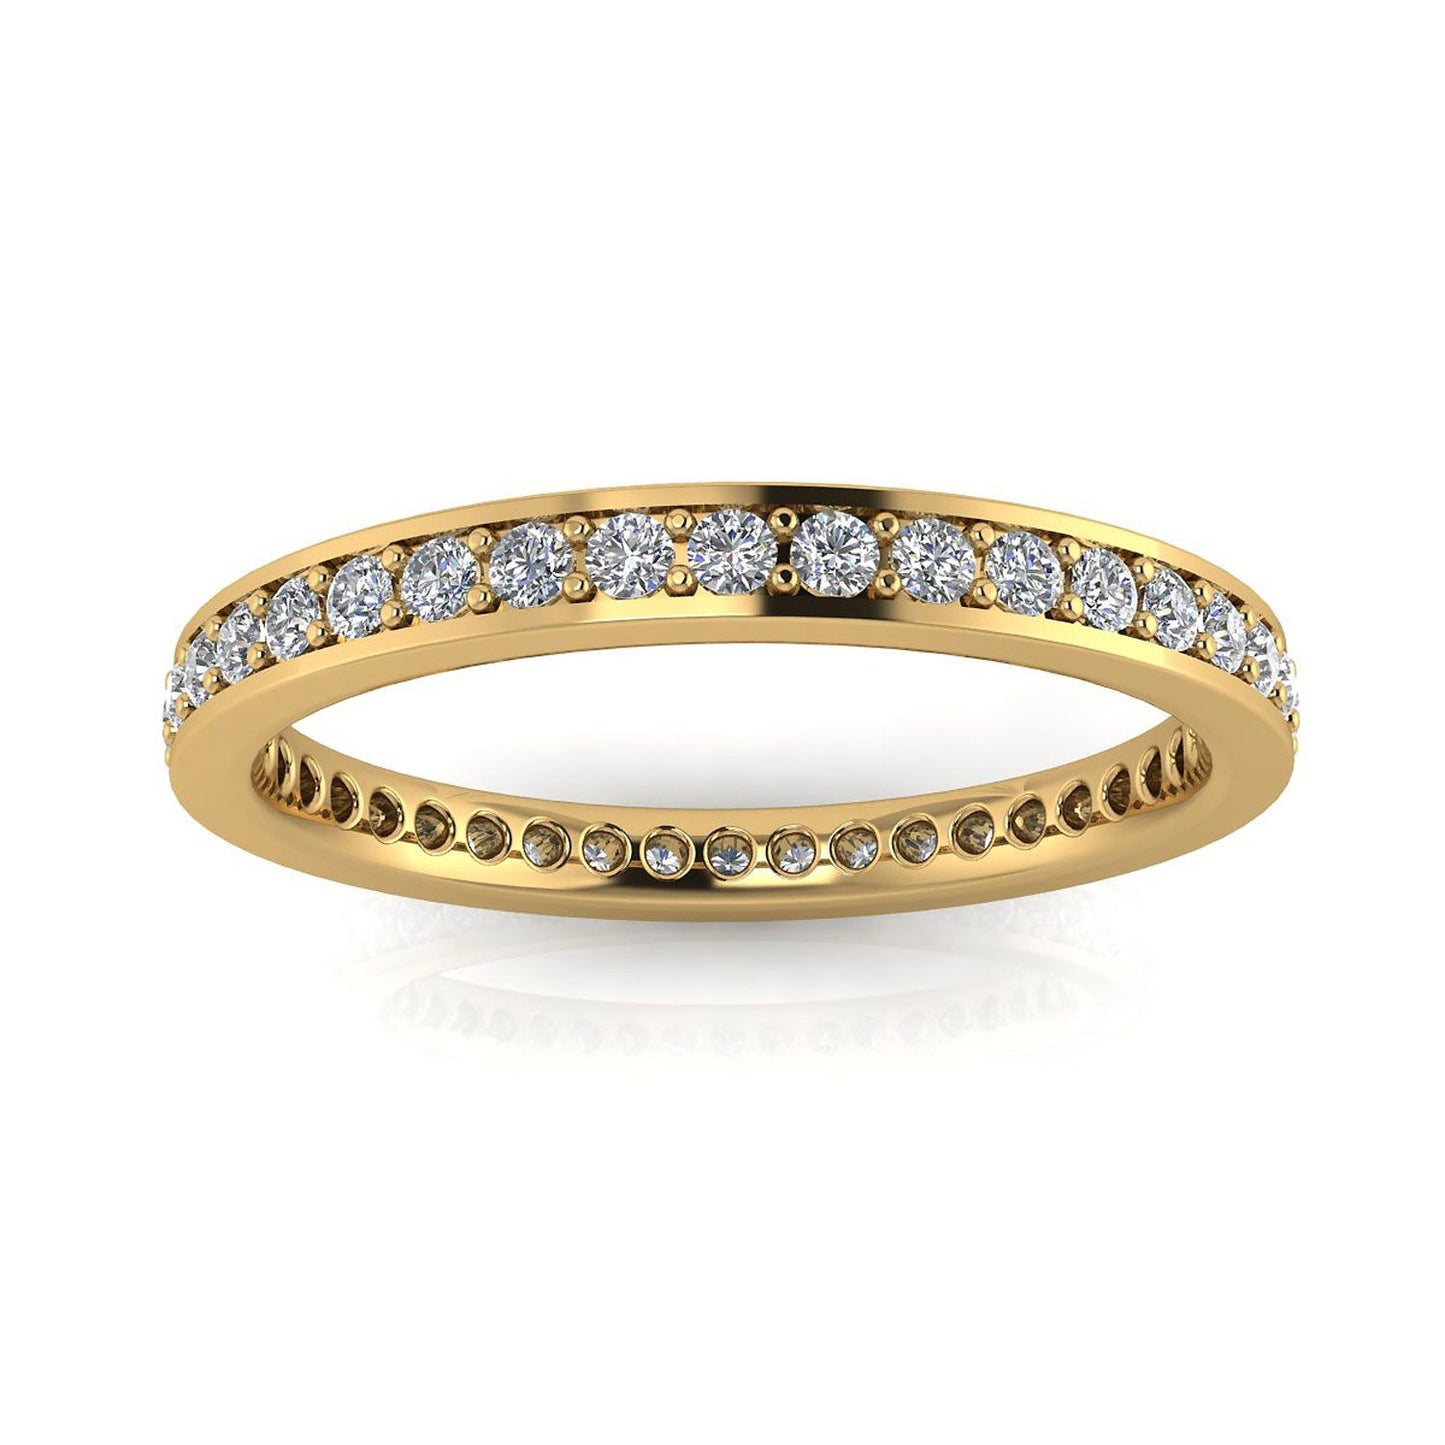 Round Brilliant Cut Diamond Channel Pave Set Eternity Ring In 18k Yellow Gold  (0.99ct. Tw.) Ring Size 7.5